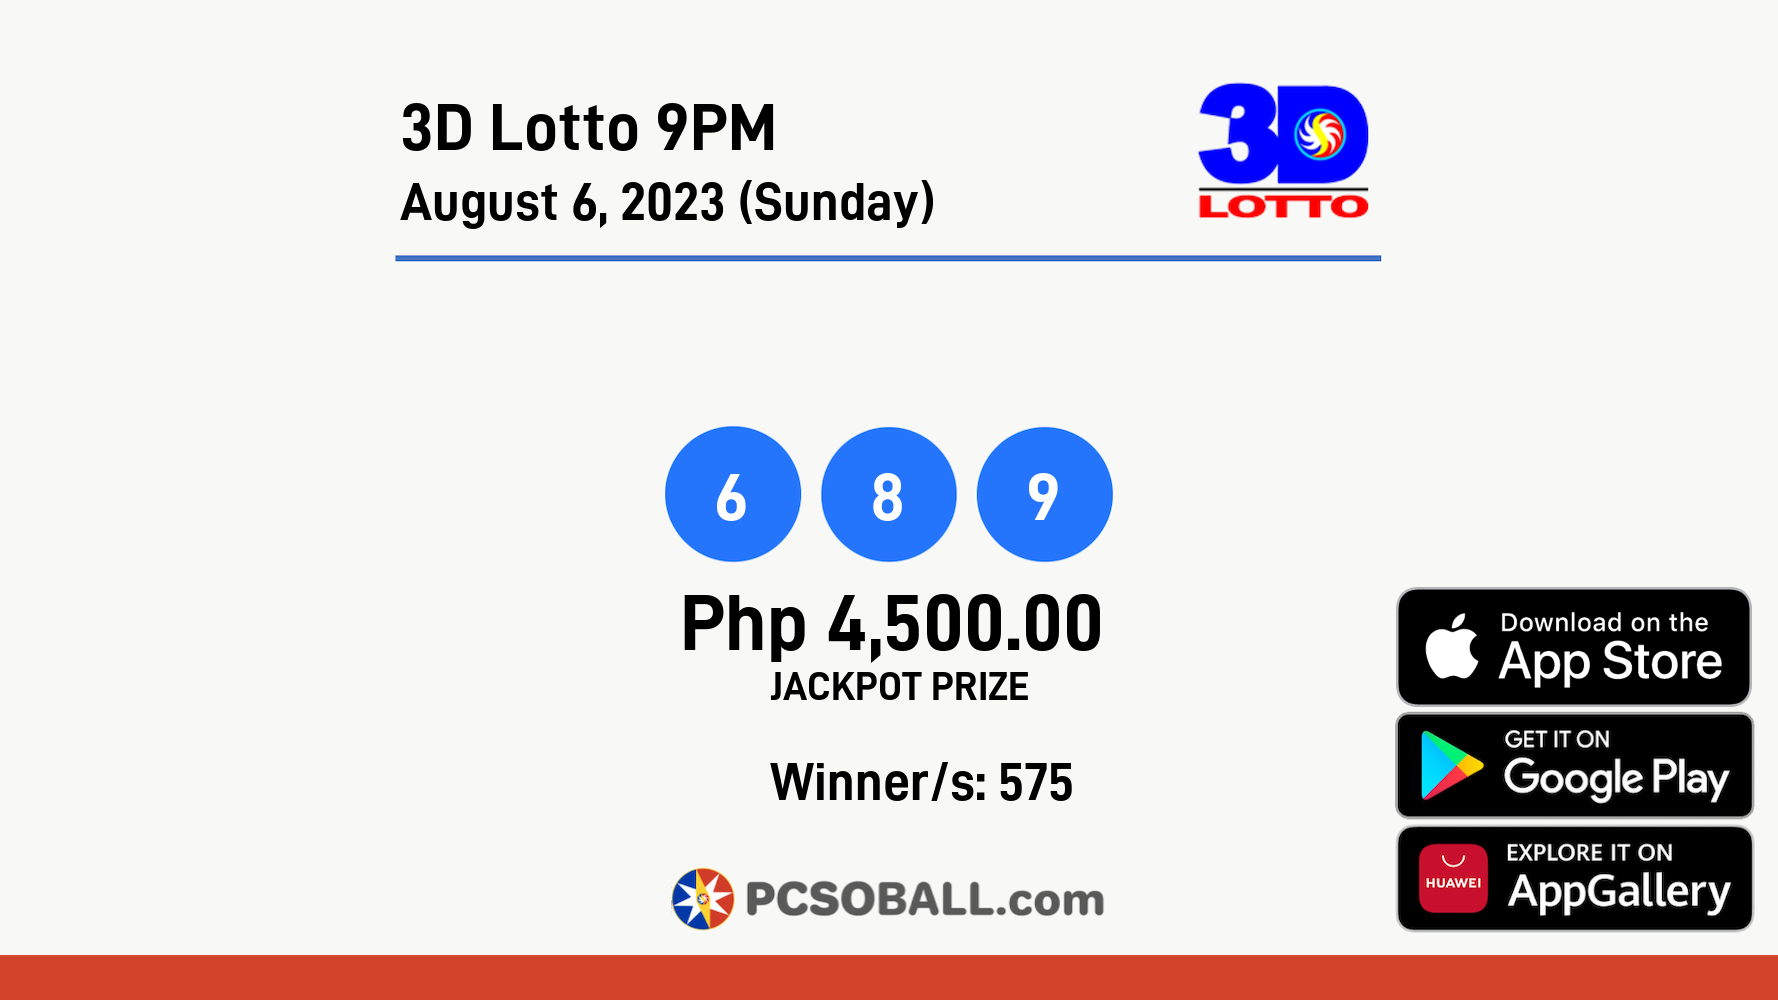 3D Lotto 9PM August 6, 2023 (Sunday) Result